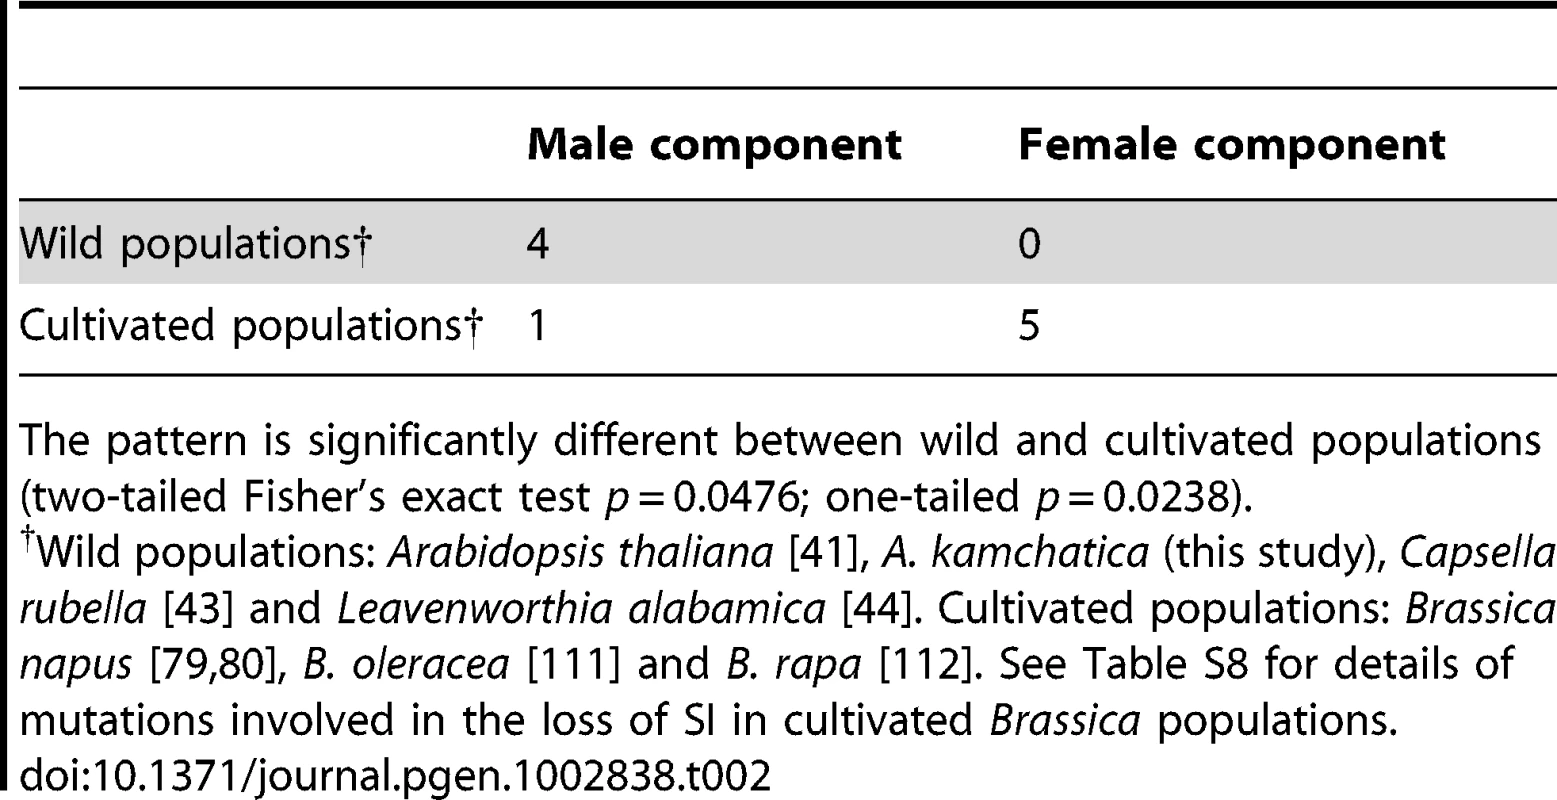 Numbers of examples in which the primary mutations involved in the loss of SI are attributable to male or female components of self-incompatibility.